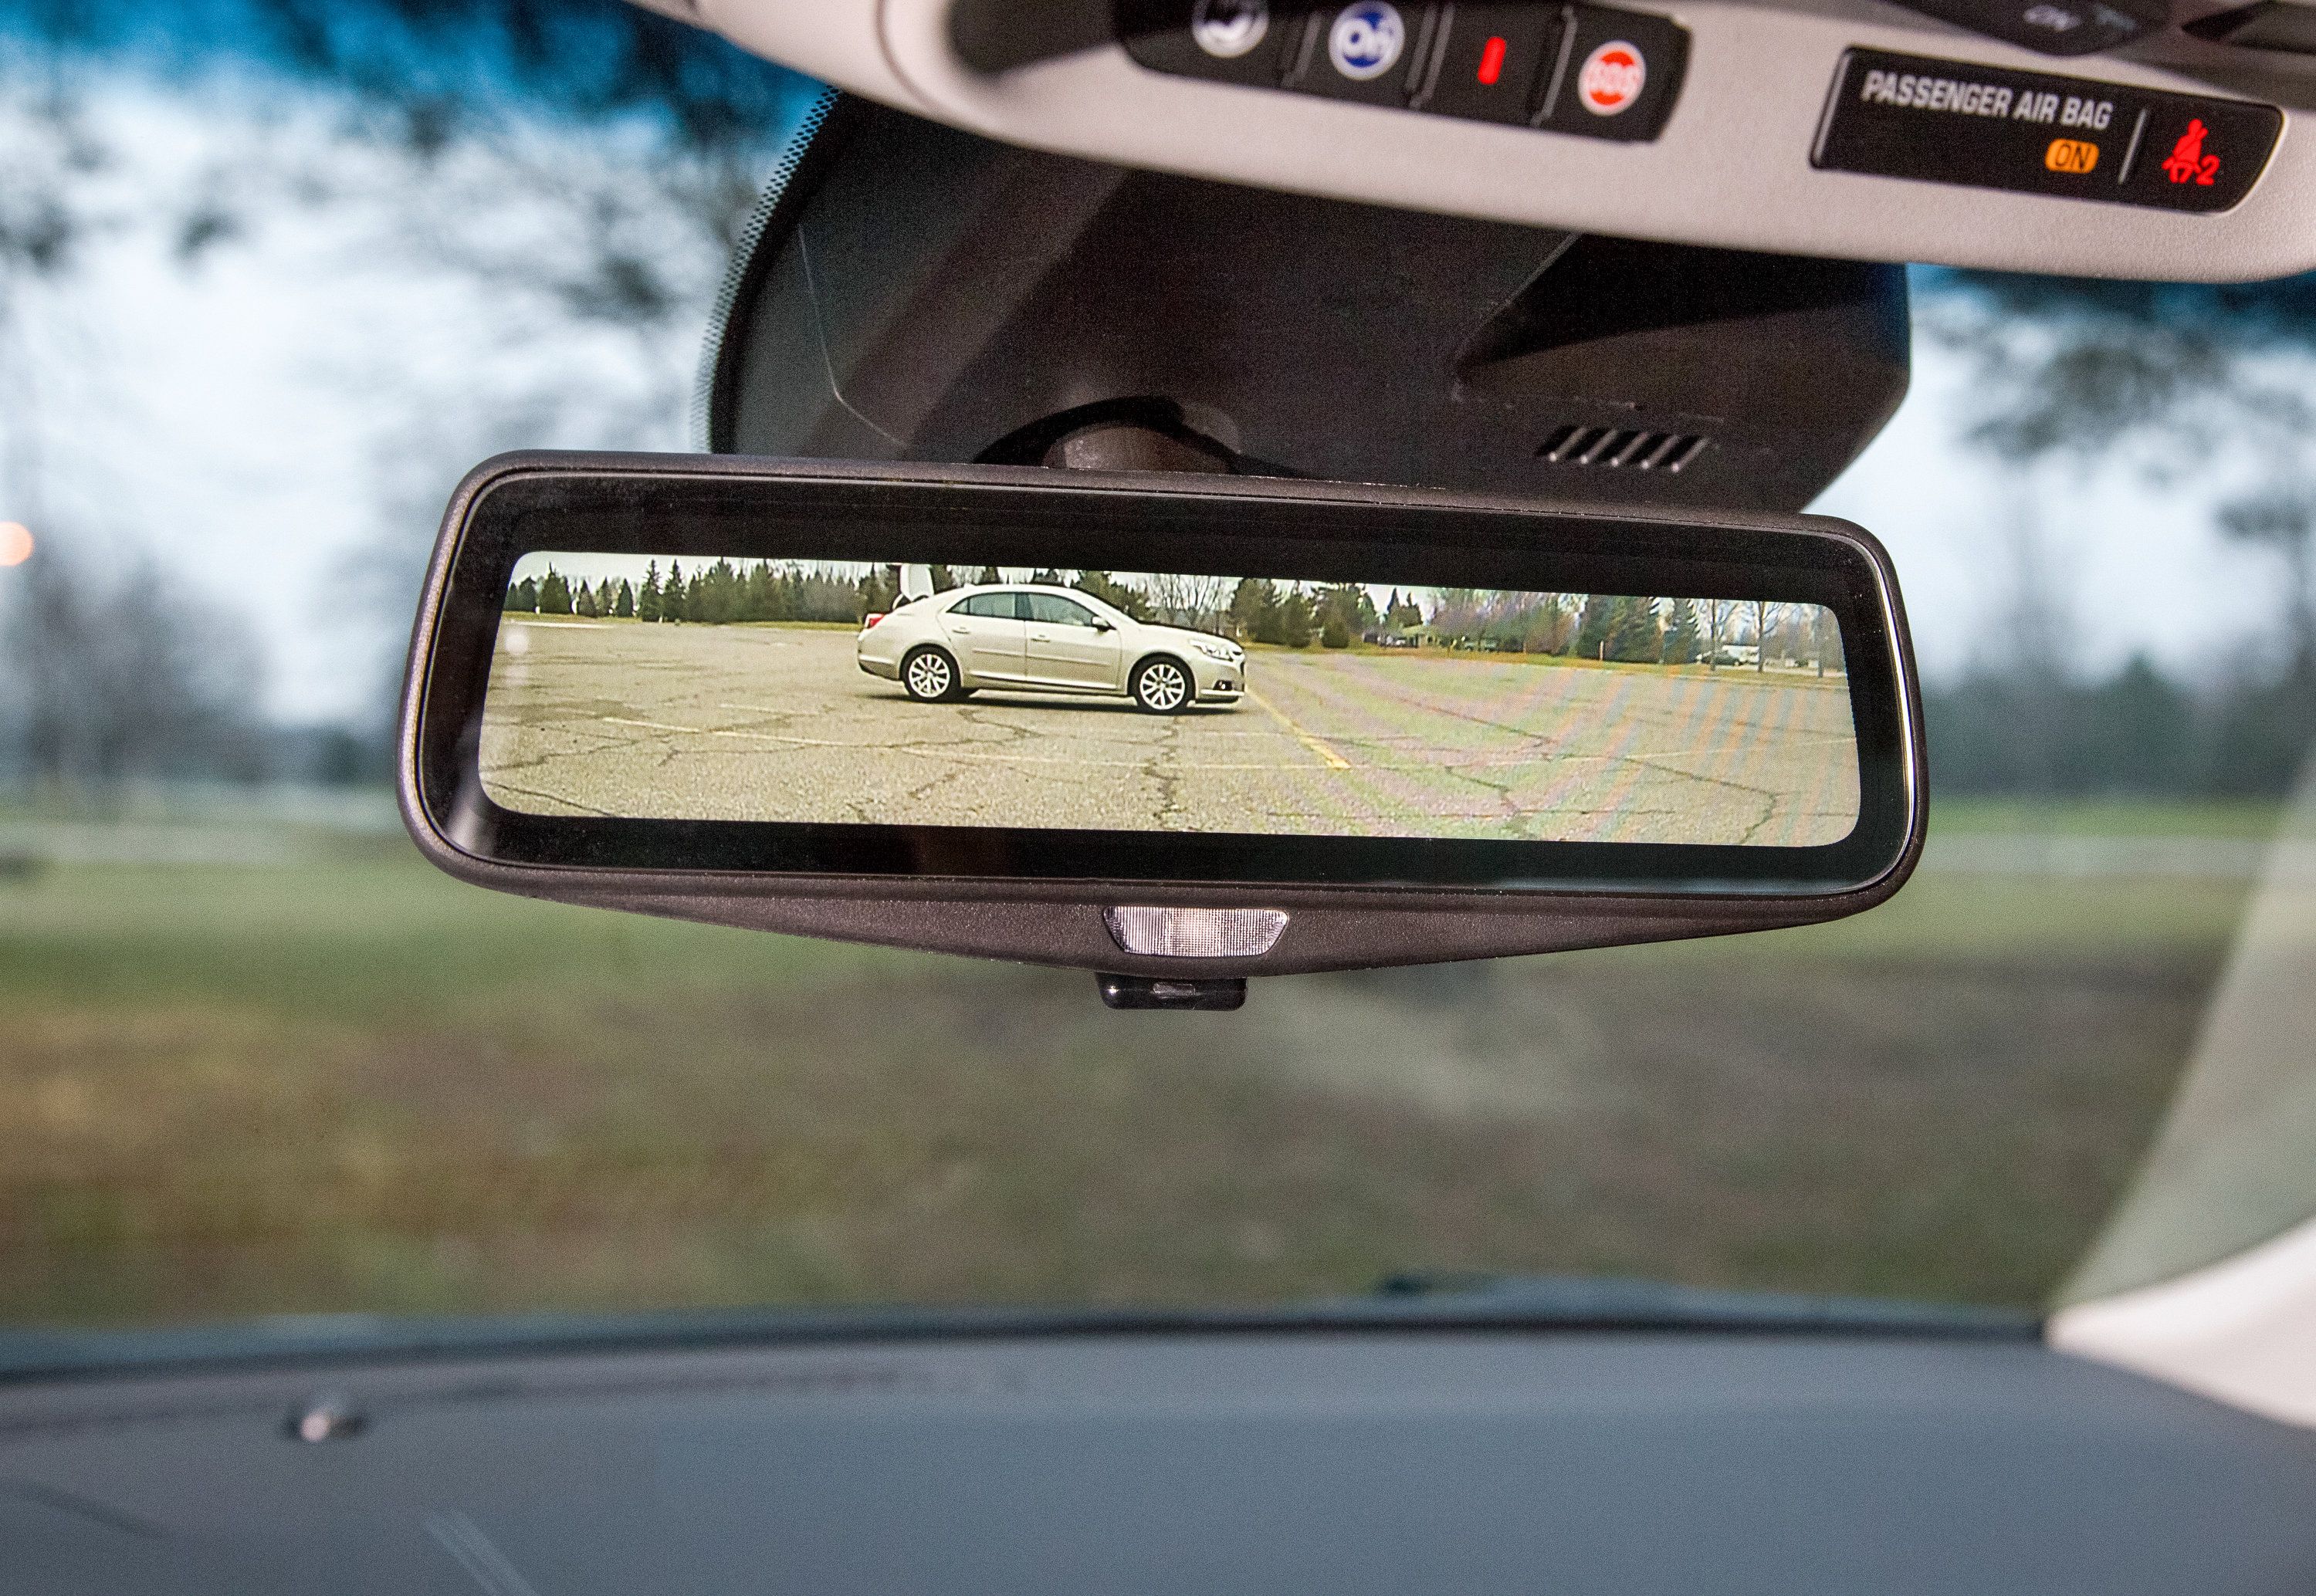 Video Rearview Mirror technology